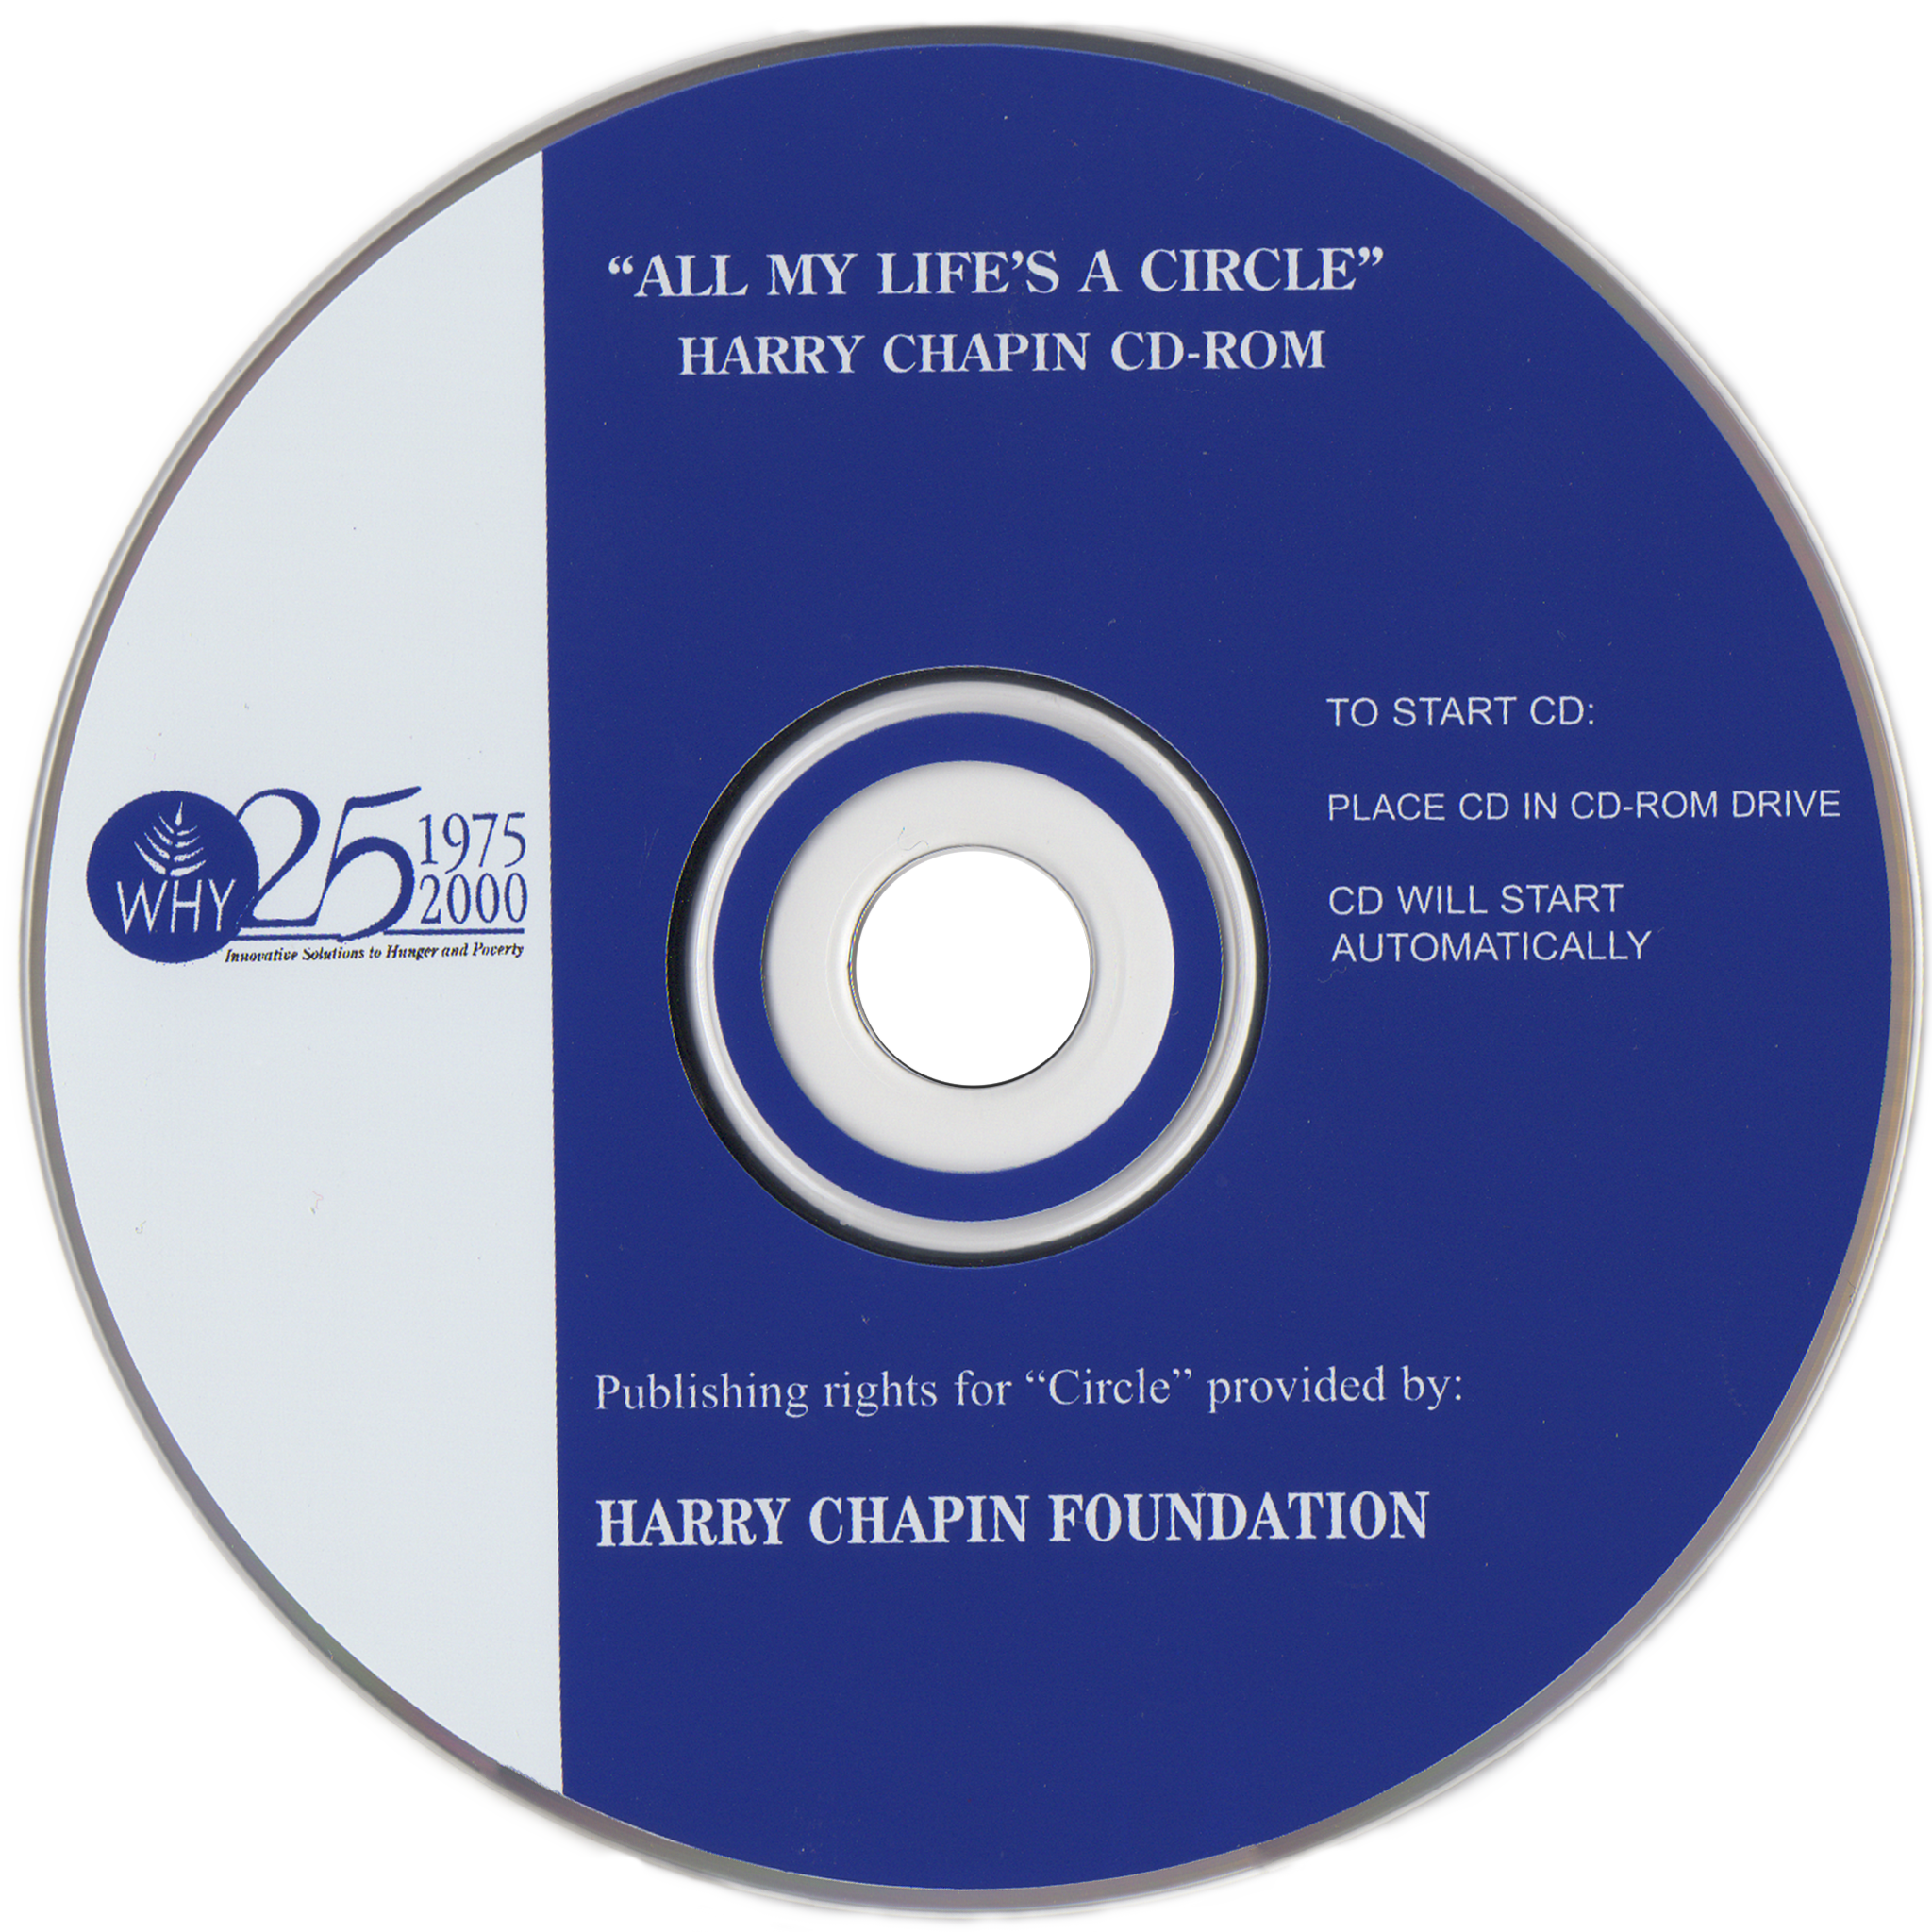 All My Life's a Circle CD-Rom – Harry Chapin Music